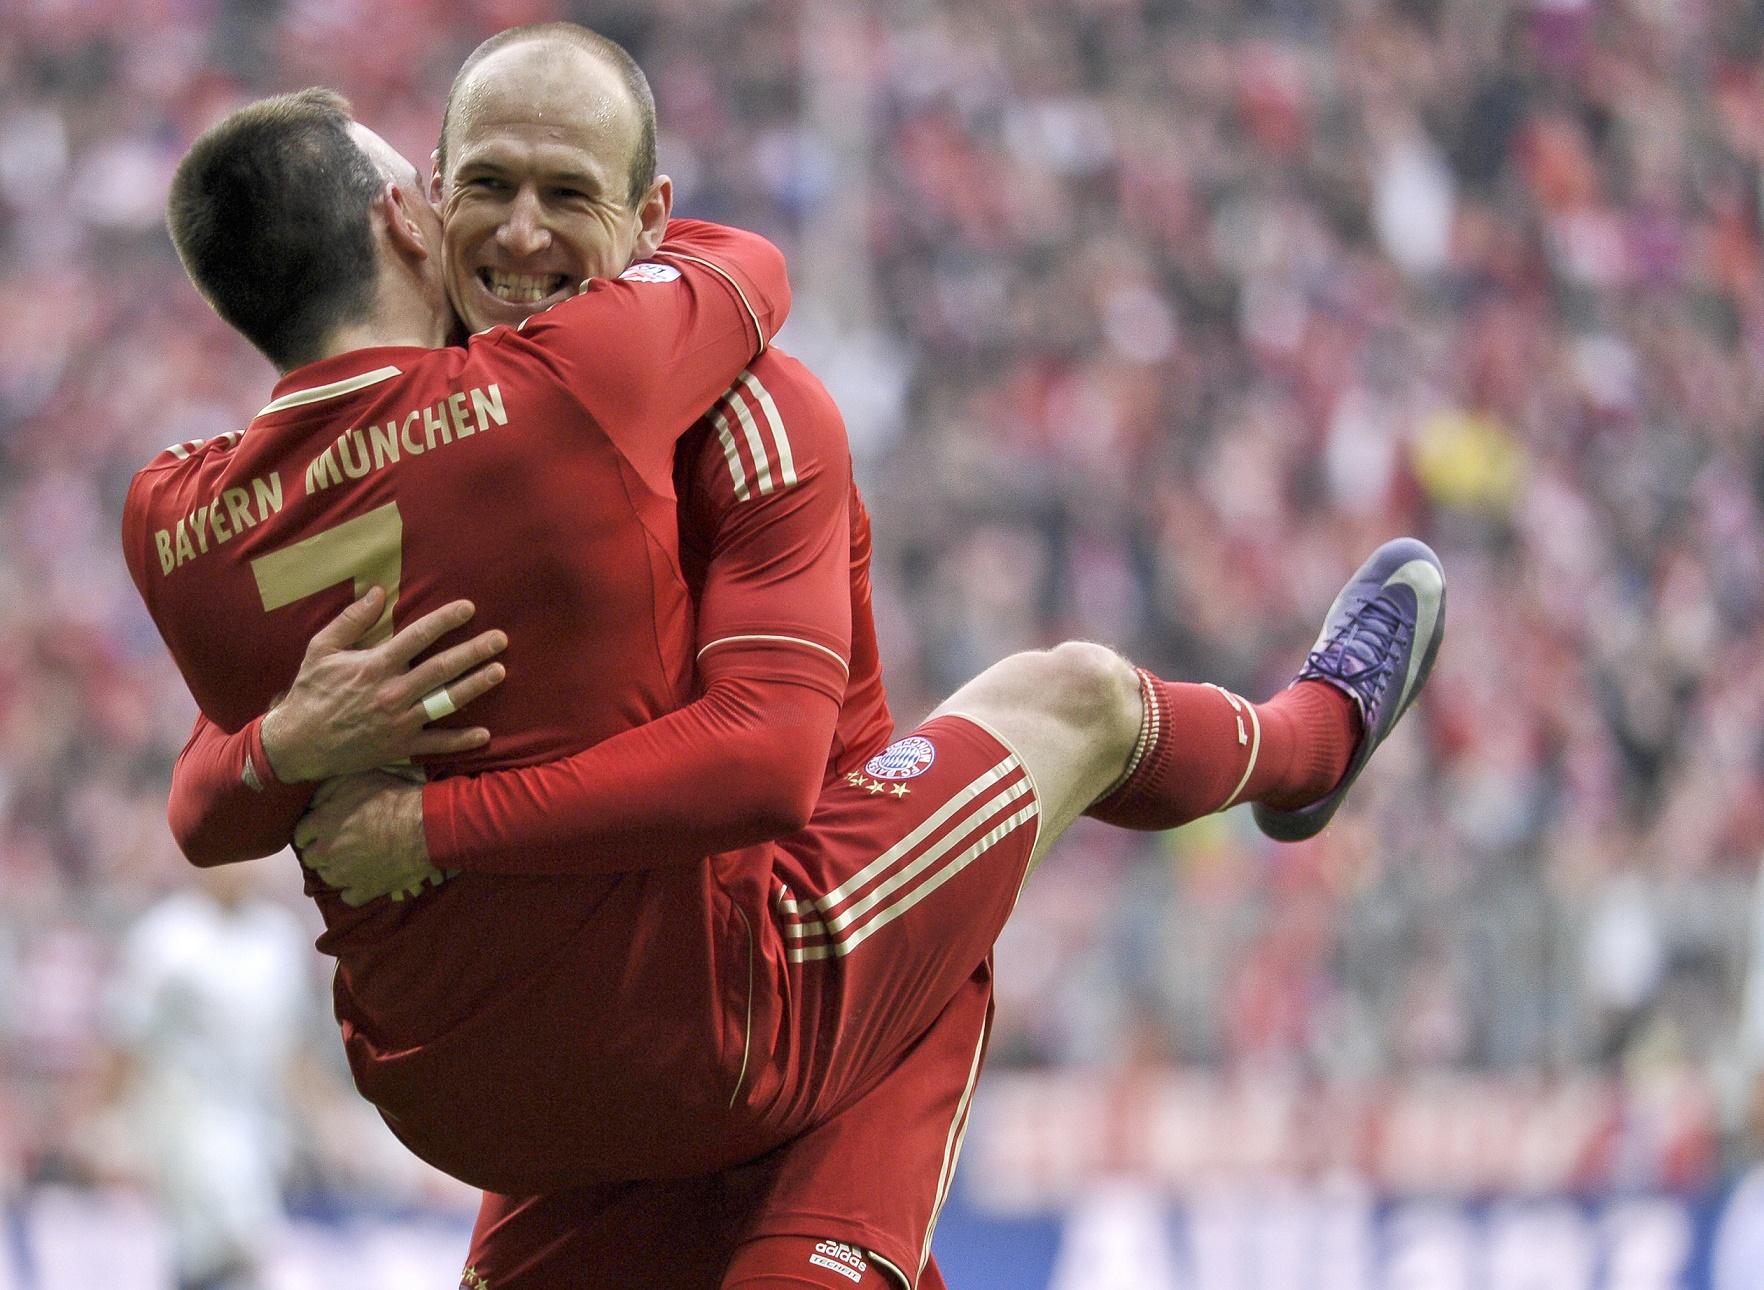 Bayern Munich's French midfielder Franck Ribery (L) is greeted by midfielder Arjen Robben (R) after scoring the seventh goal for his team during the German first division Bundesliga football match FC Bayern Munich vs TSG 1899 Hoffenheim in Munich southern Germany on March10, 2012. AFP PHOTO / GUENTER SCHIFFMANN